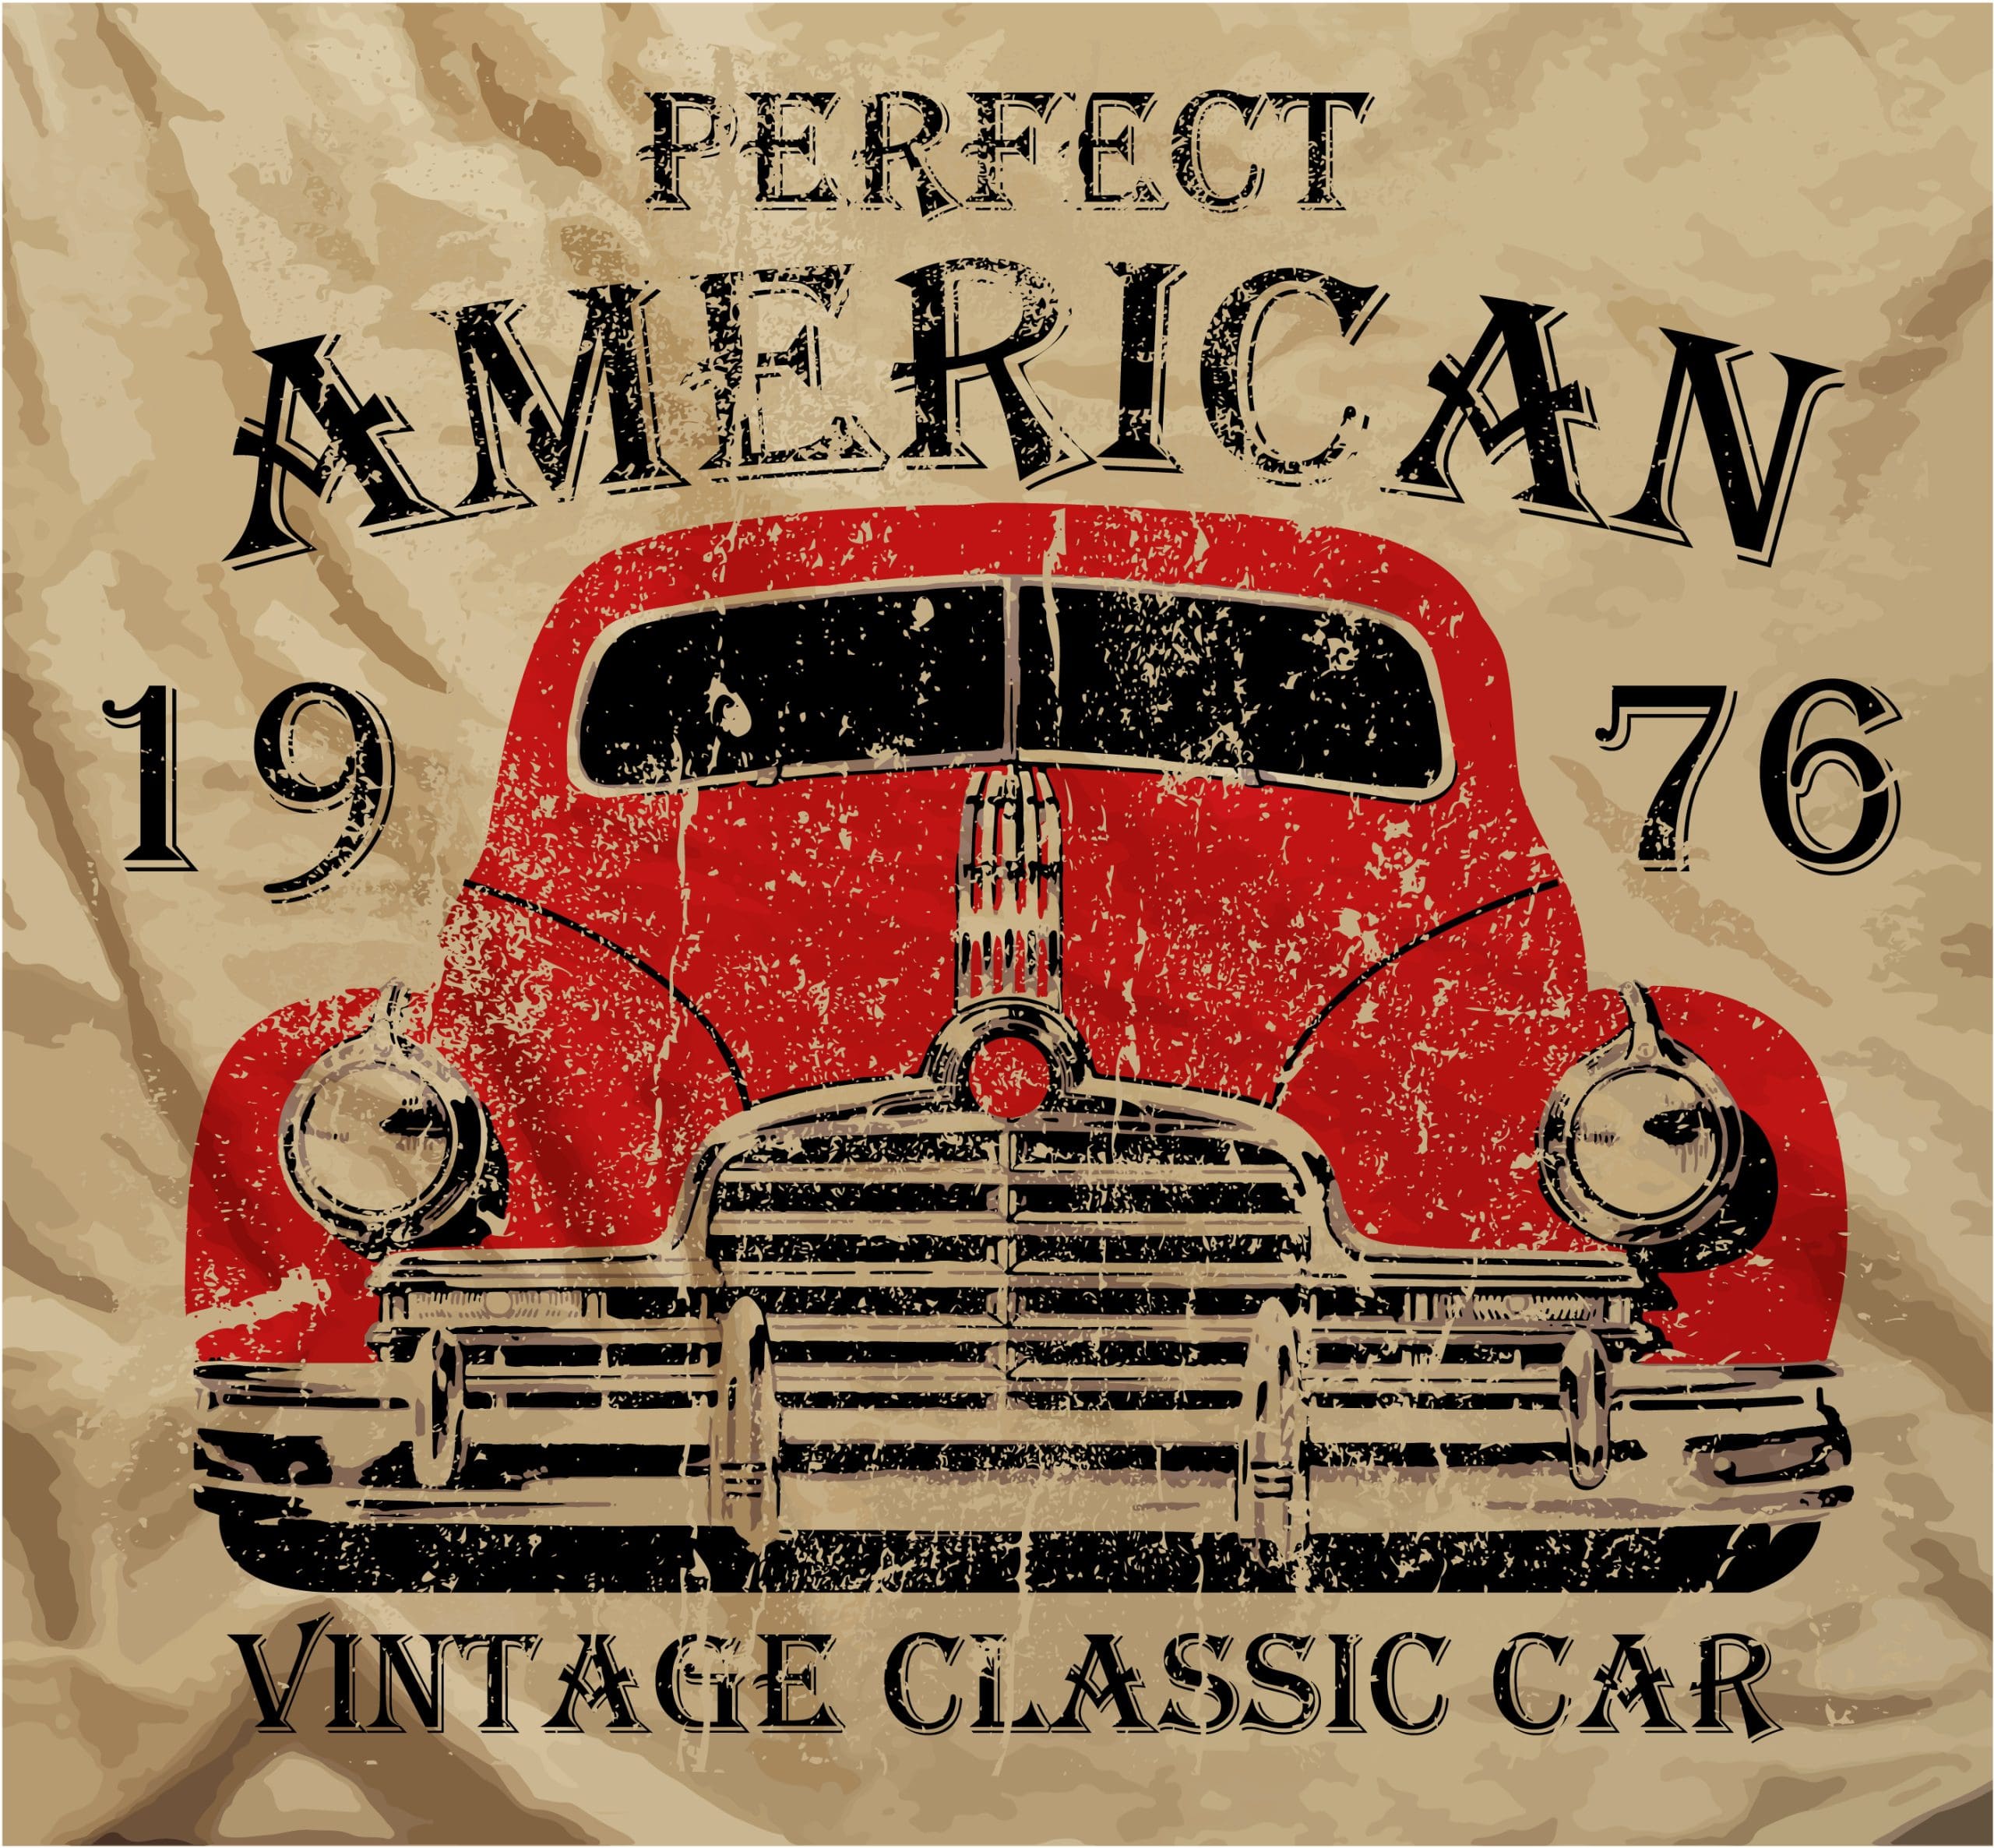 Use Vinyl Graphics for Cars to Reimagine Your Car in a Different Era